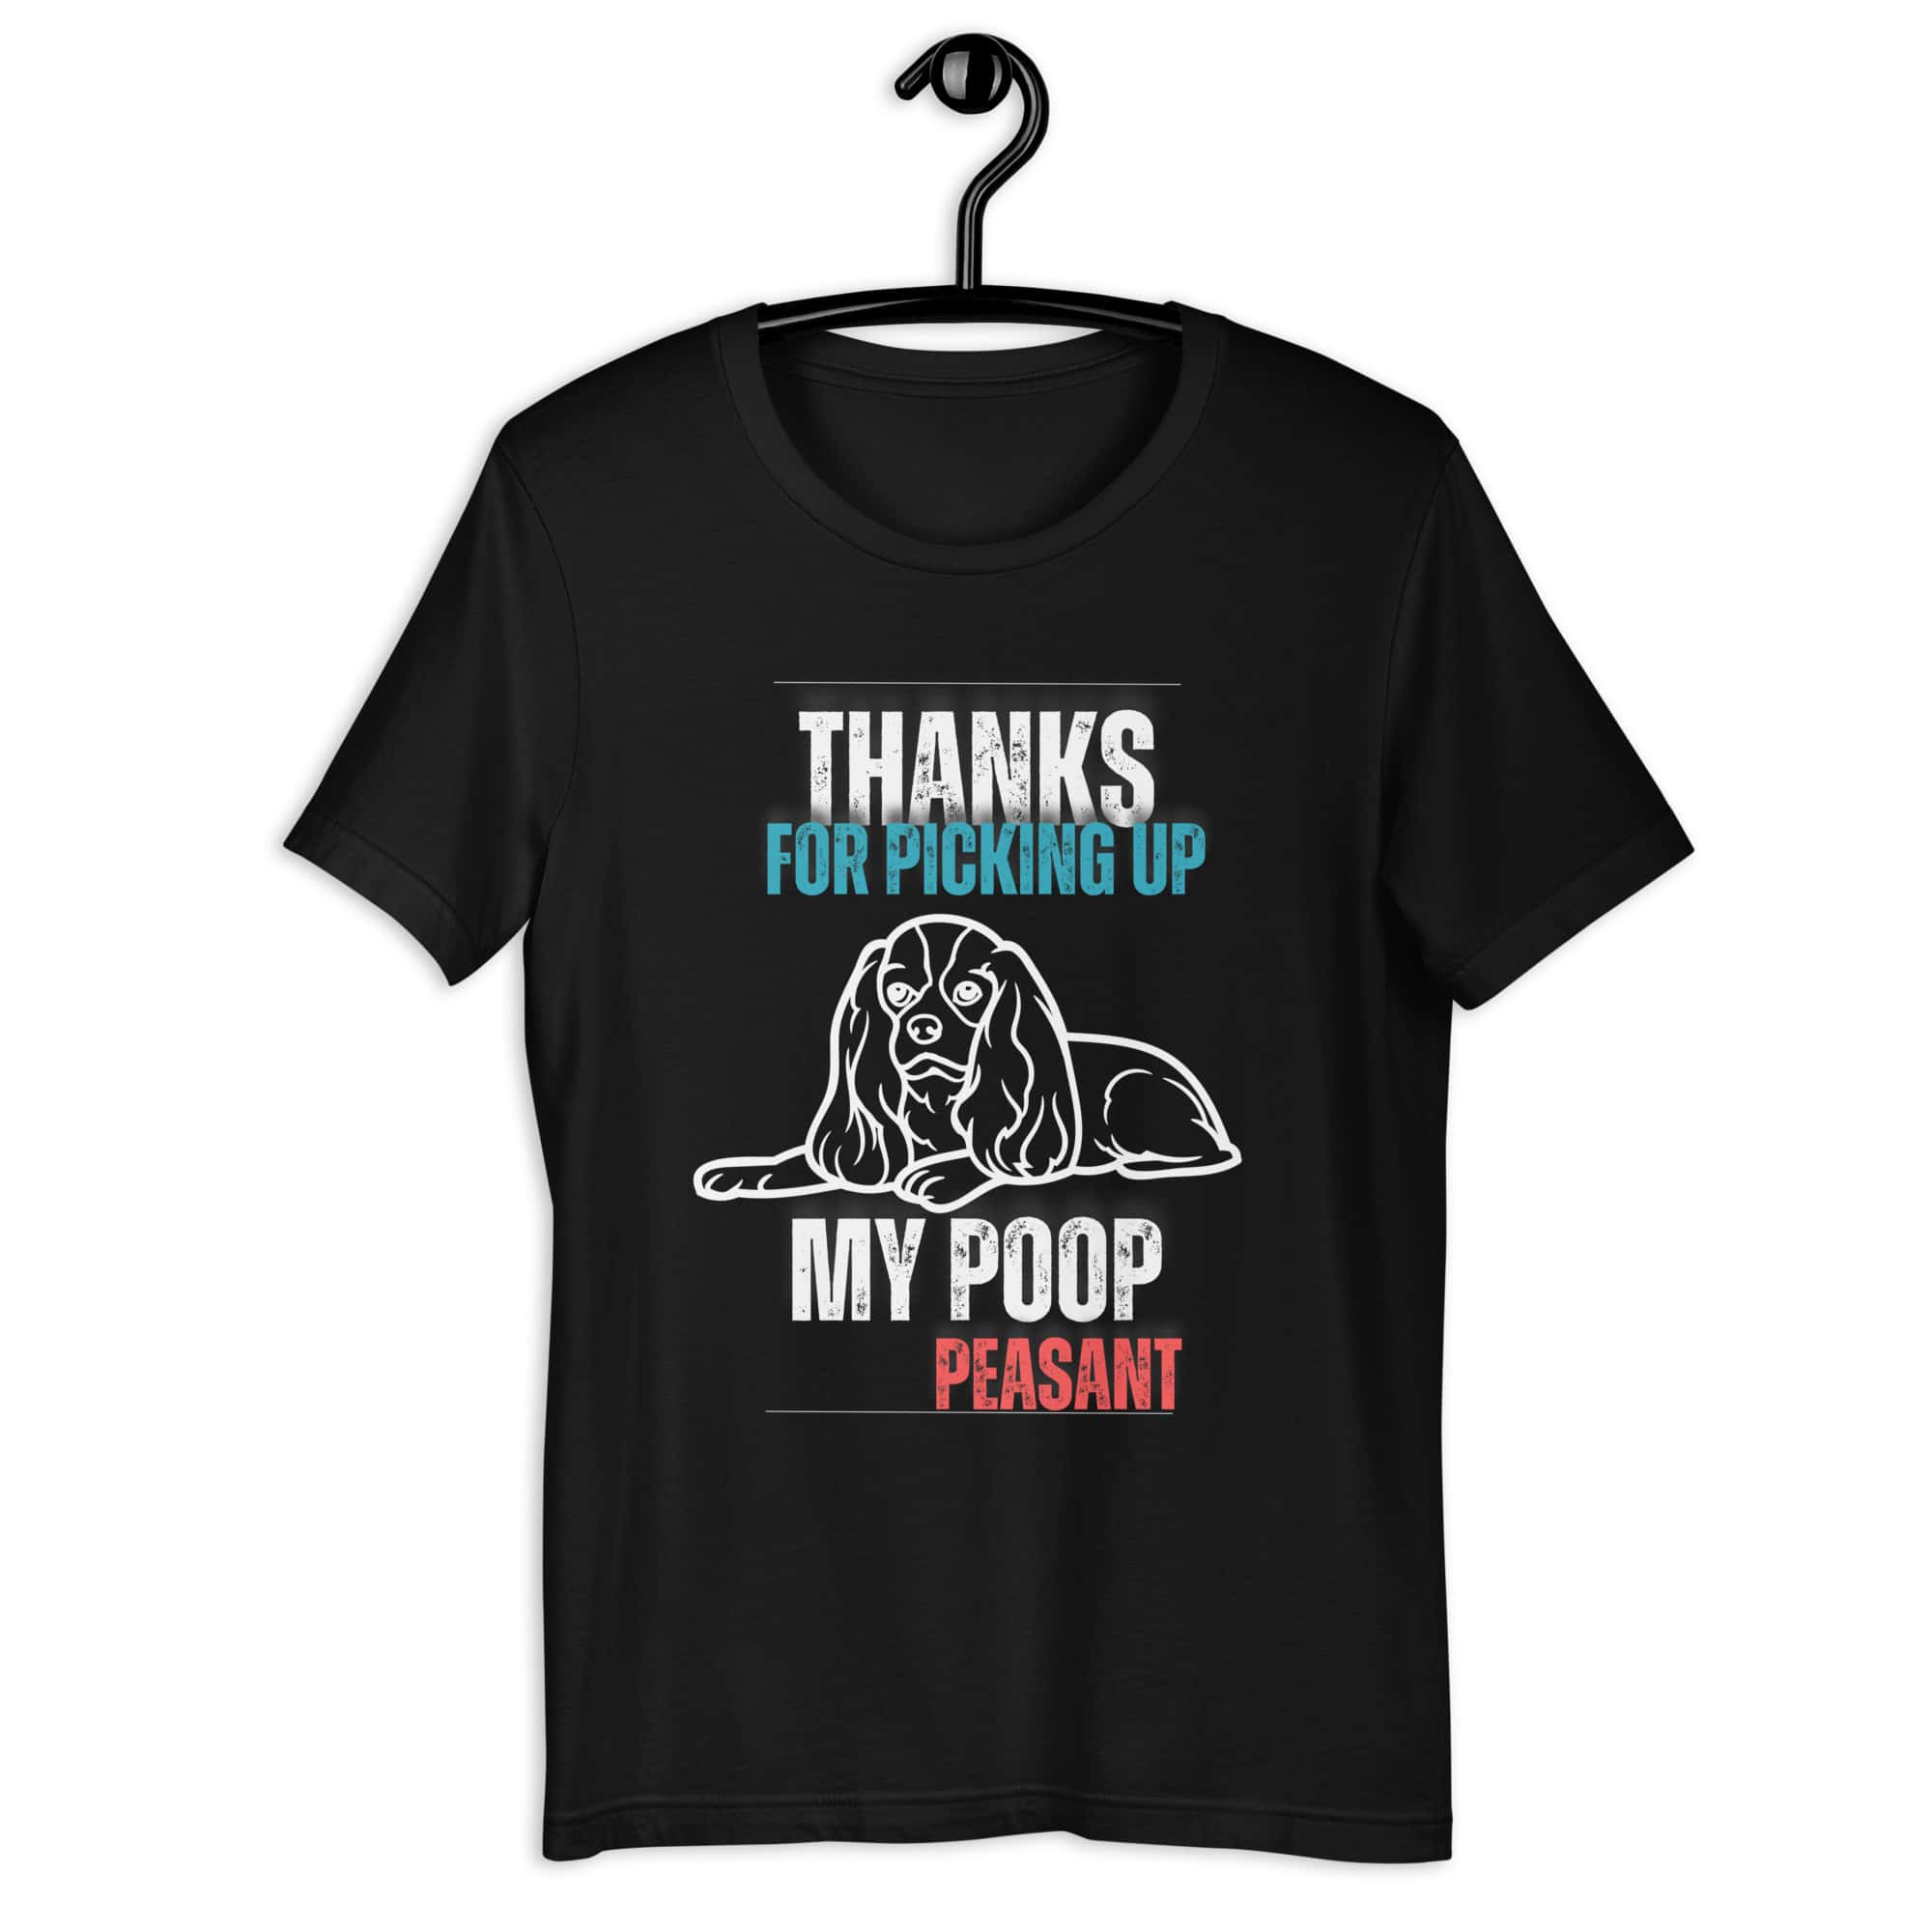 Thanks For Picking Up My POOP Funny Hounds Unisex T-Shirt. Black